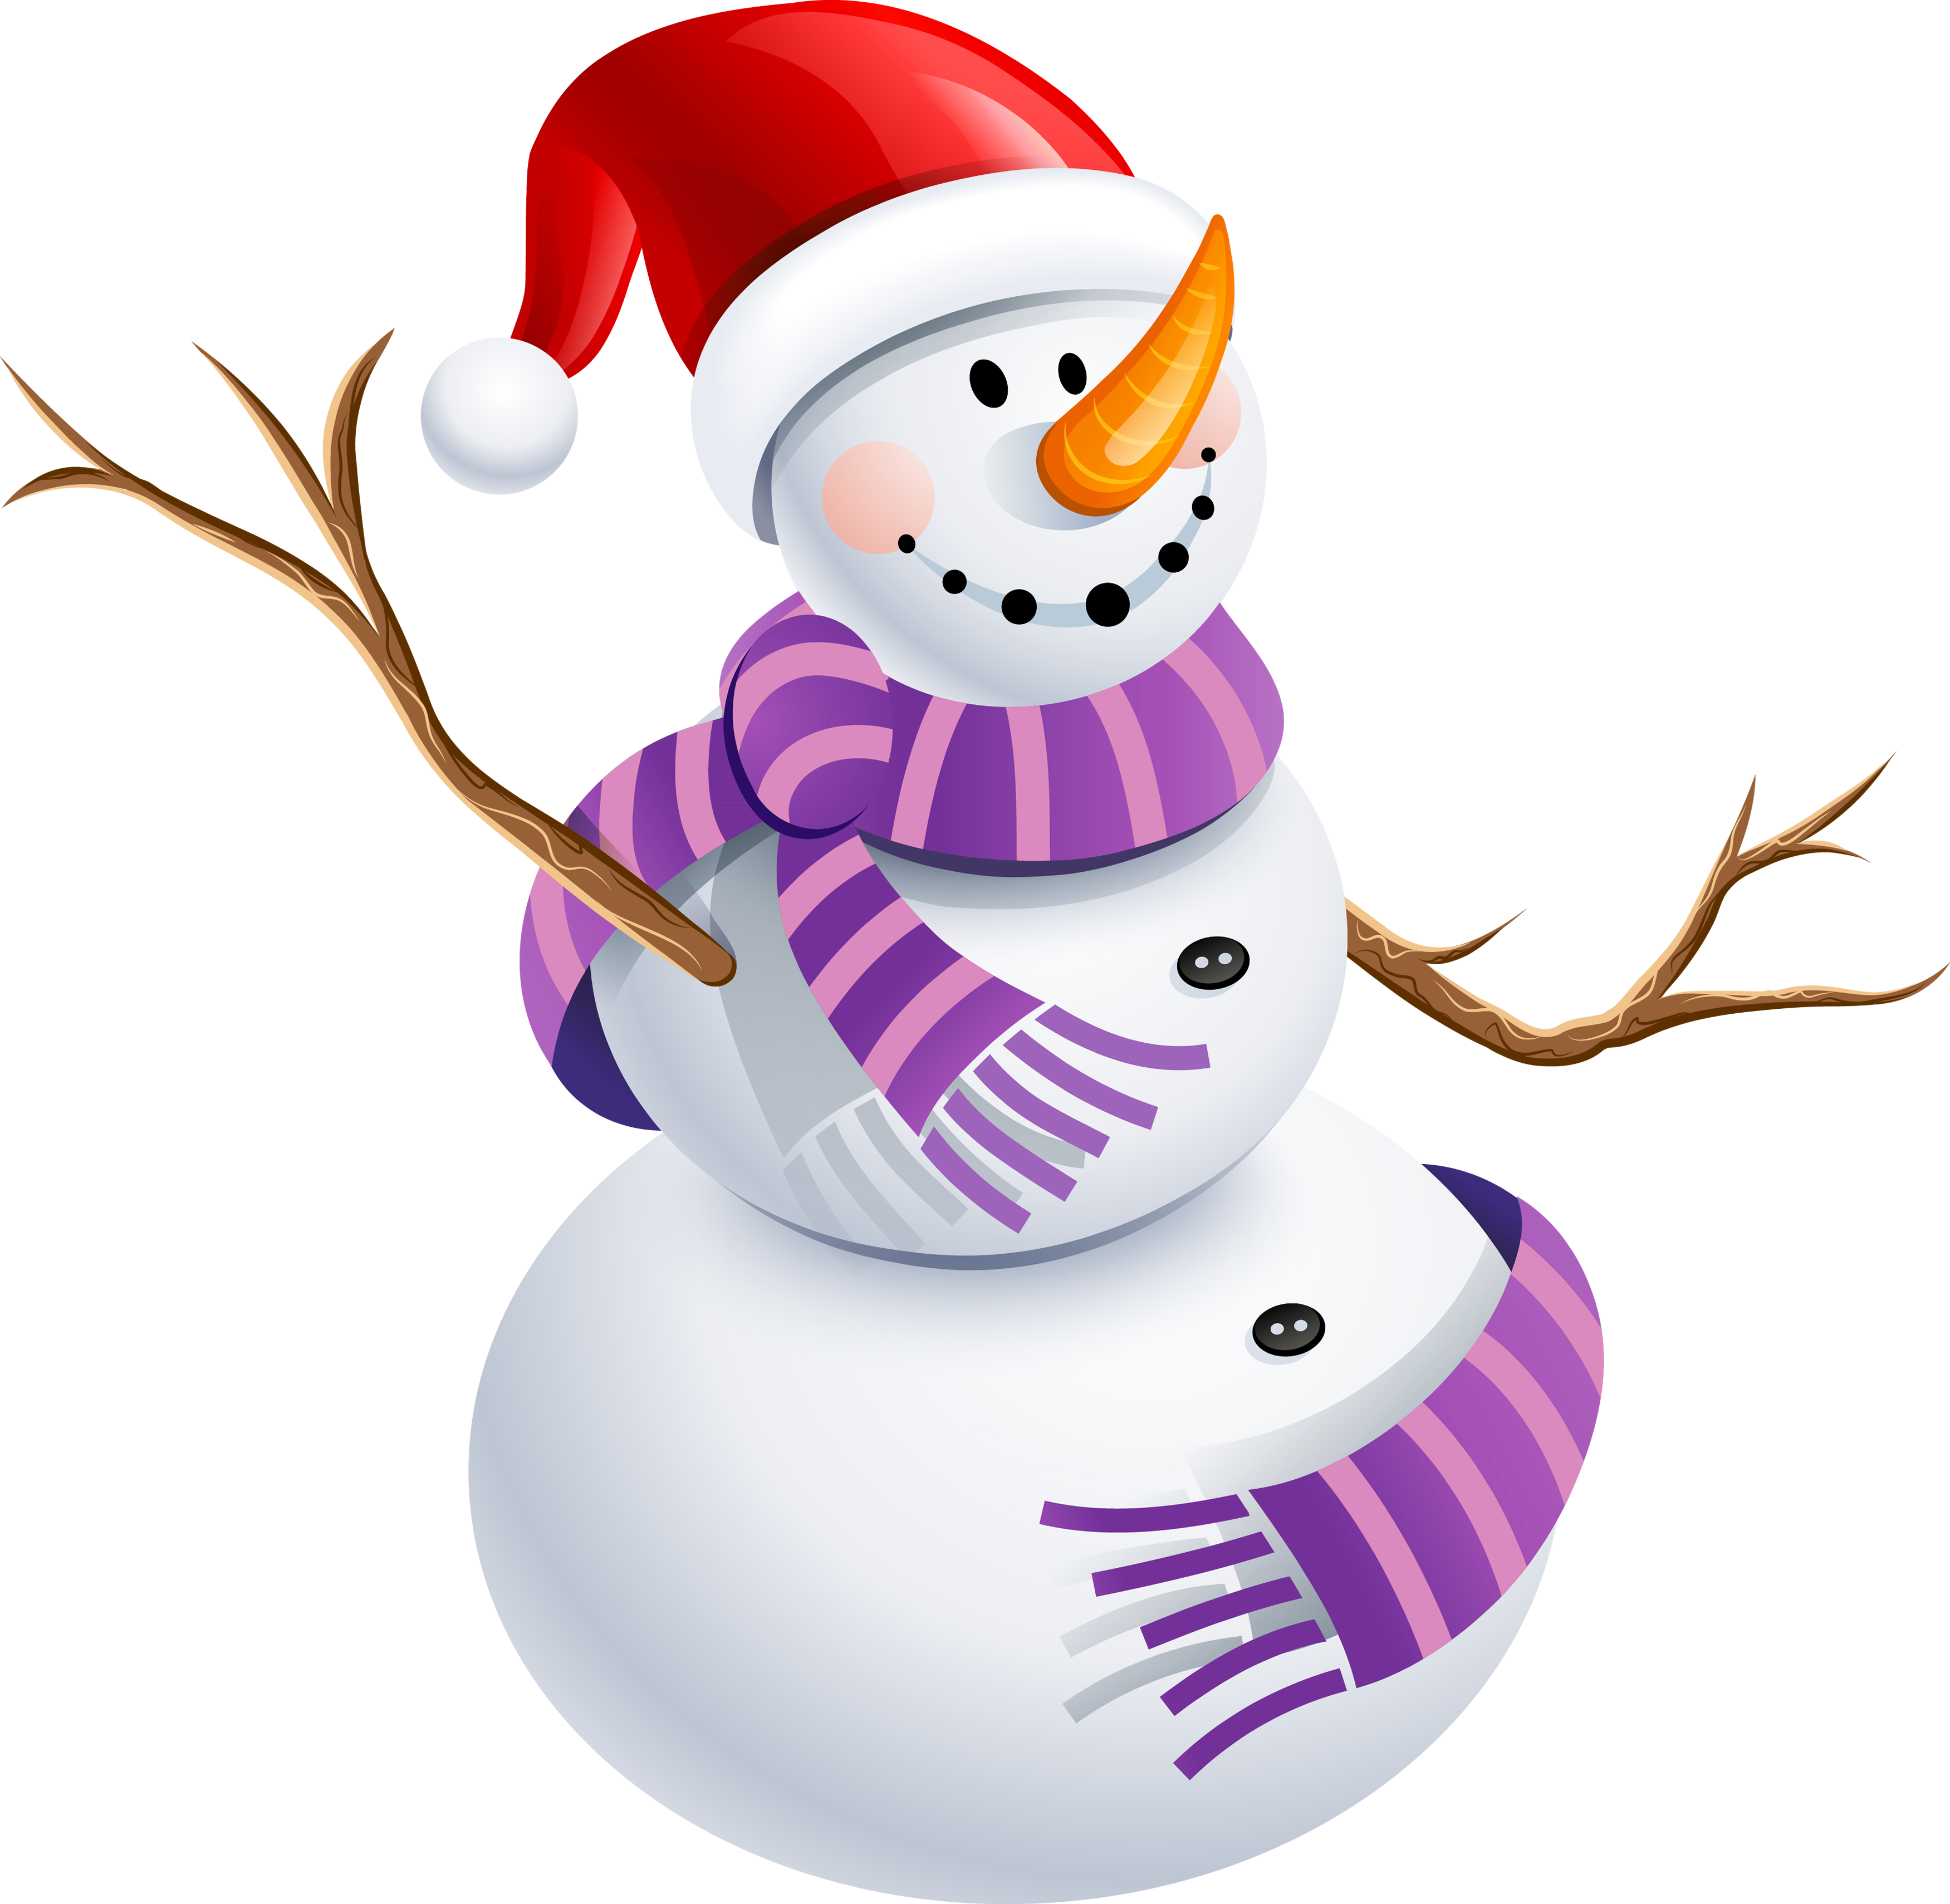 Snowman Cute Christmas Clip Art Free Here's another set of whimsical